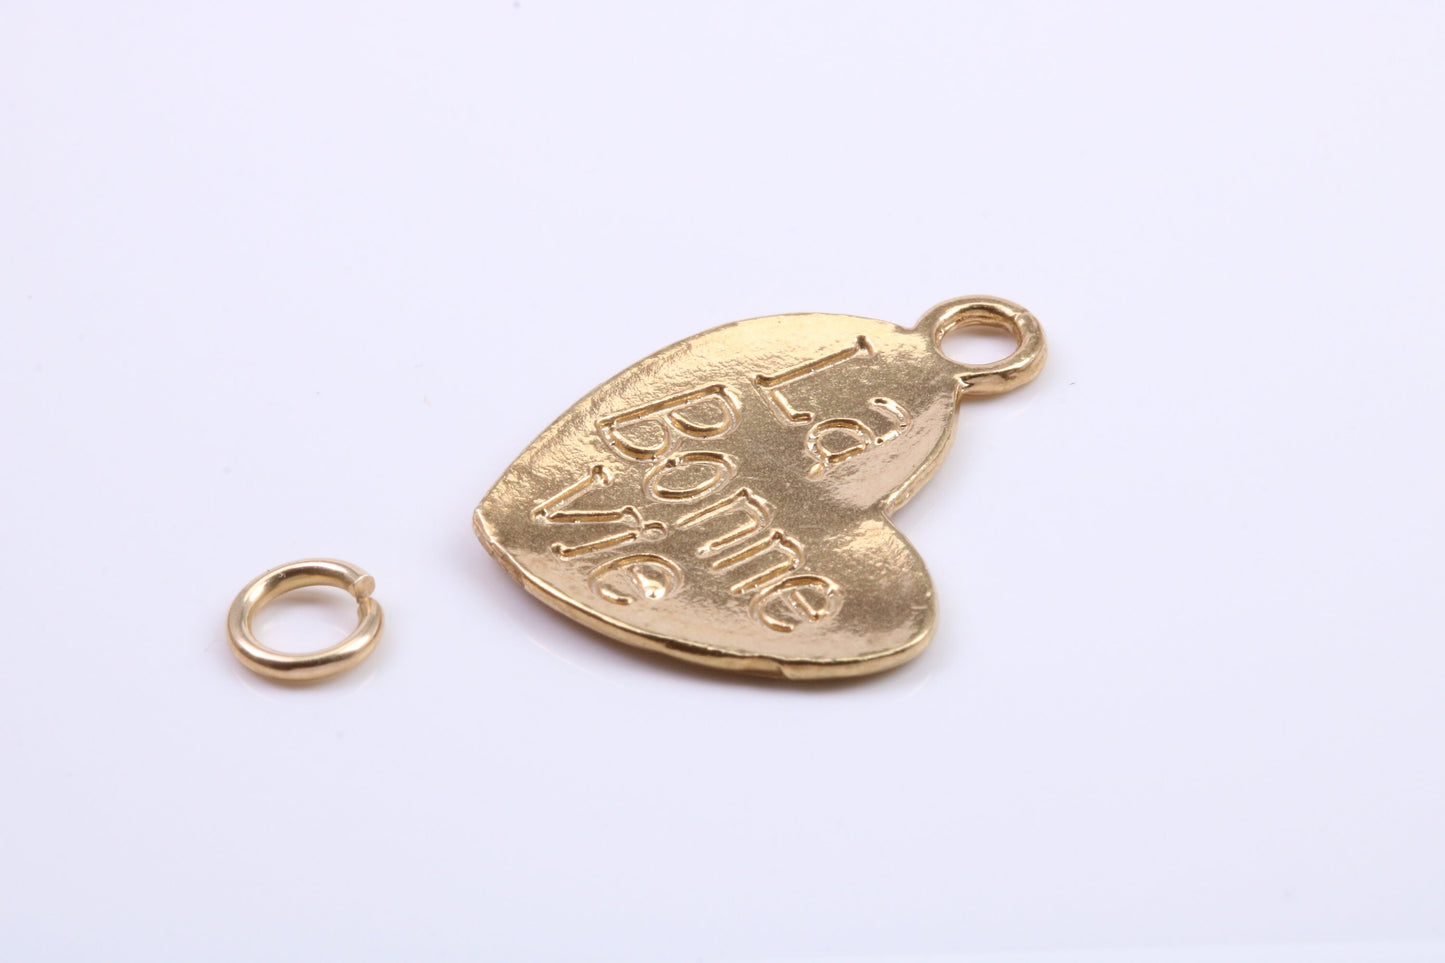 La Bonne Vie Charm, Traditional Charm, Made from Solid 9ct Yellow Gold, British Hallmarked, Complete with Attachment Link